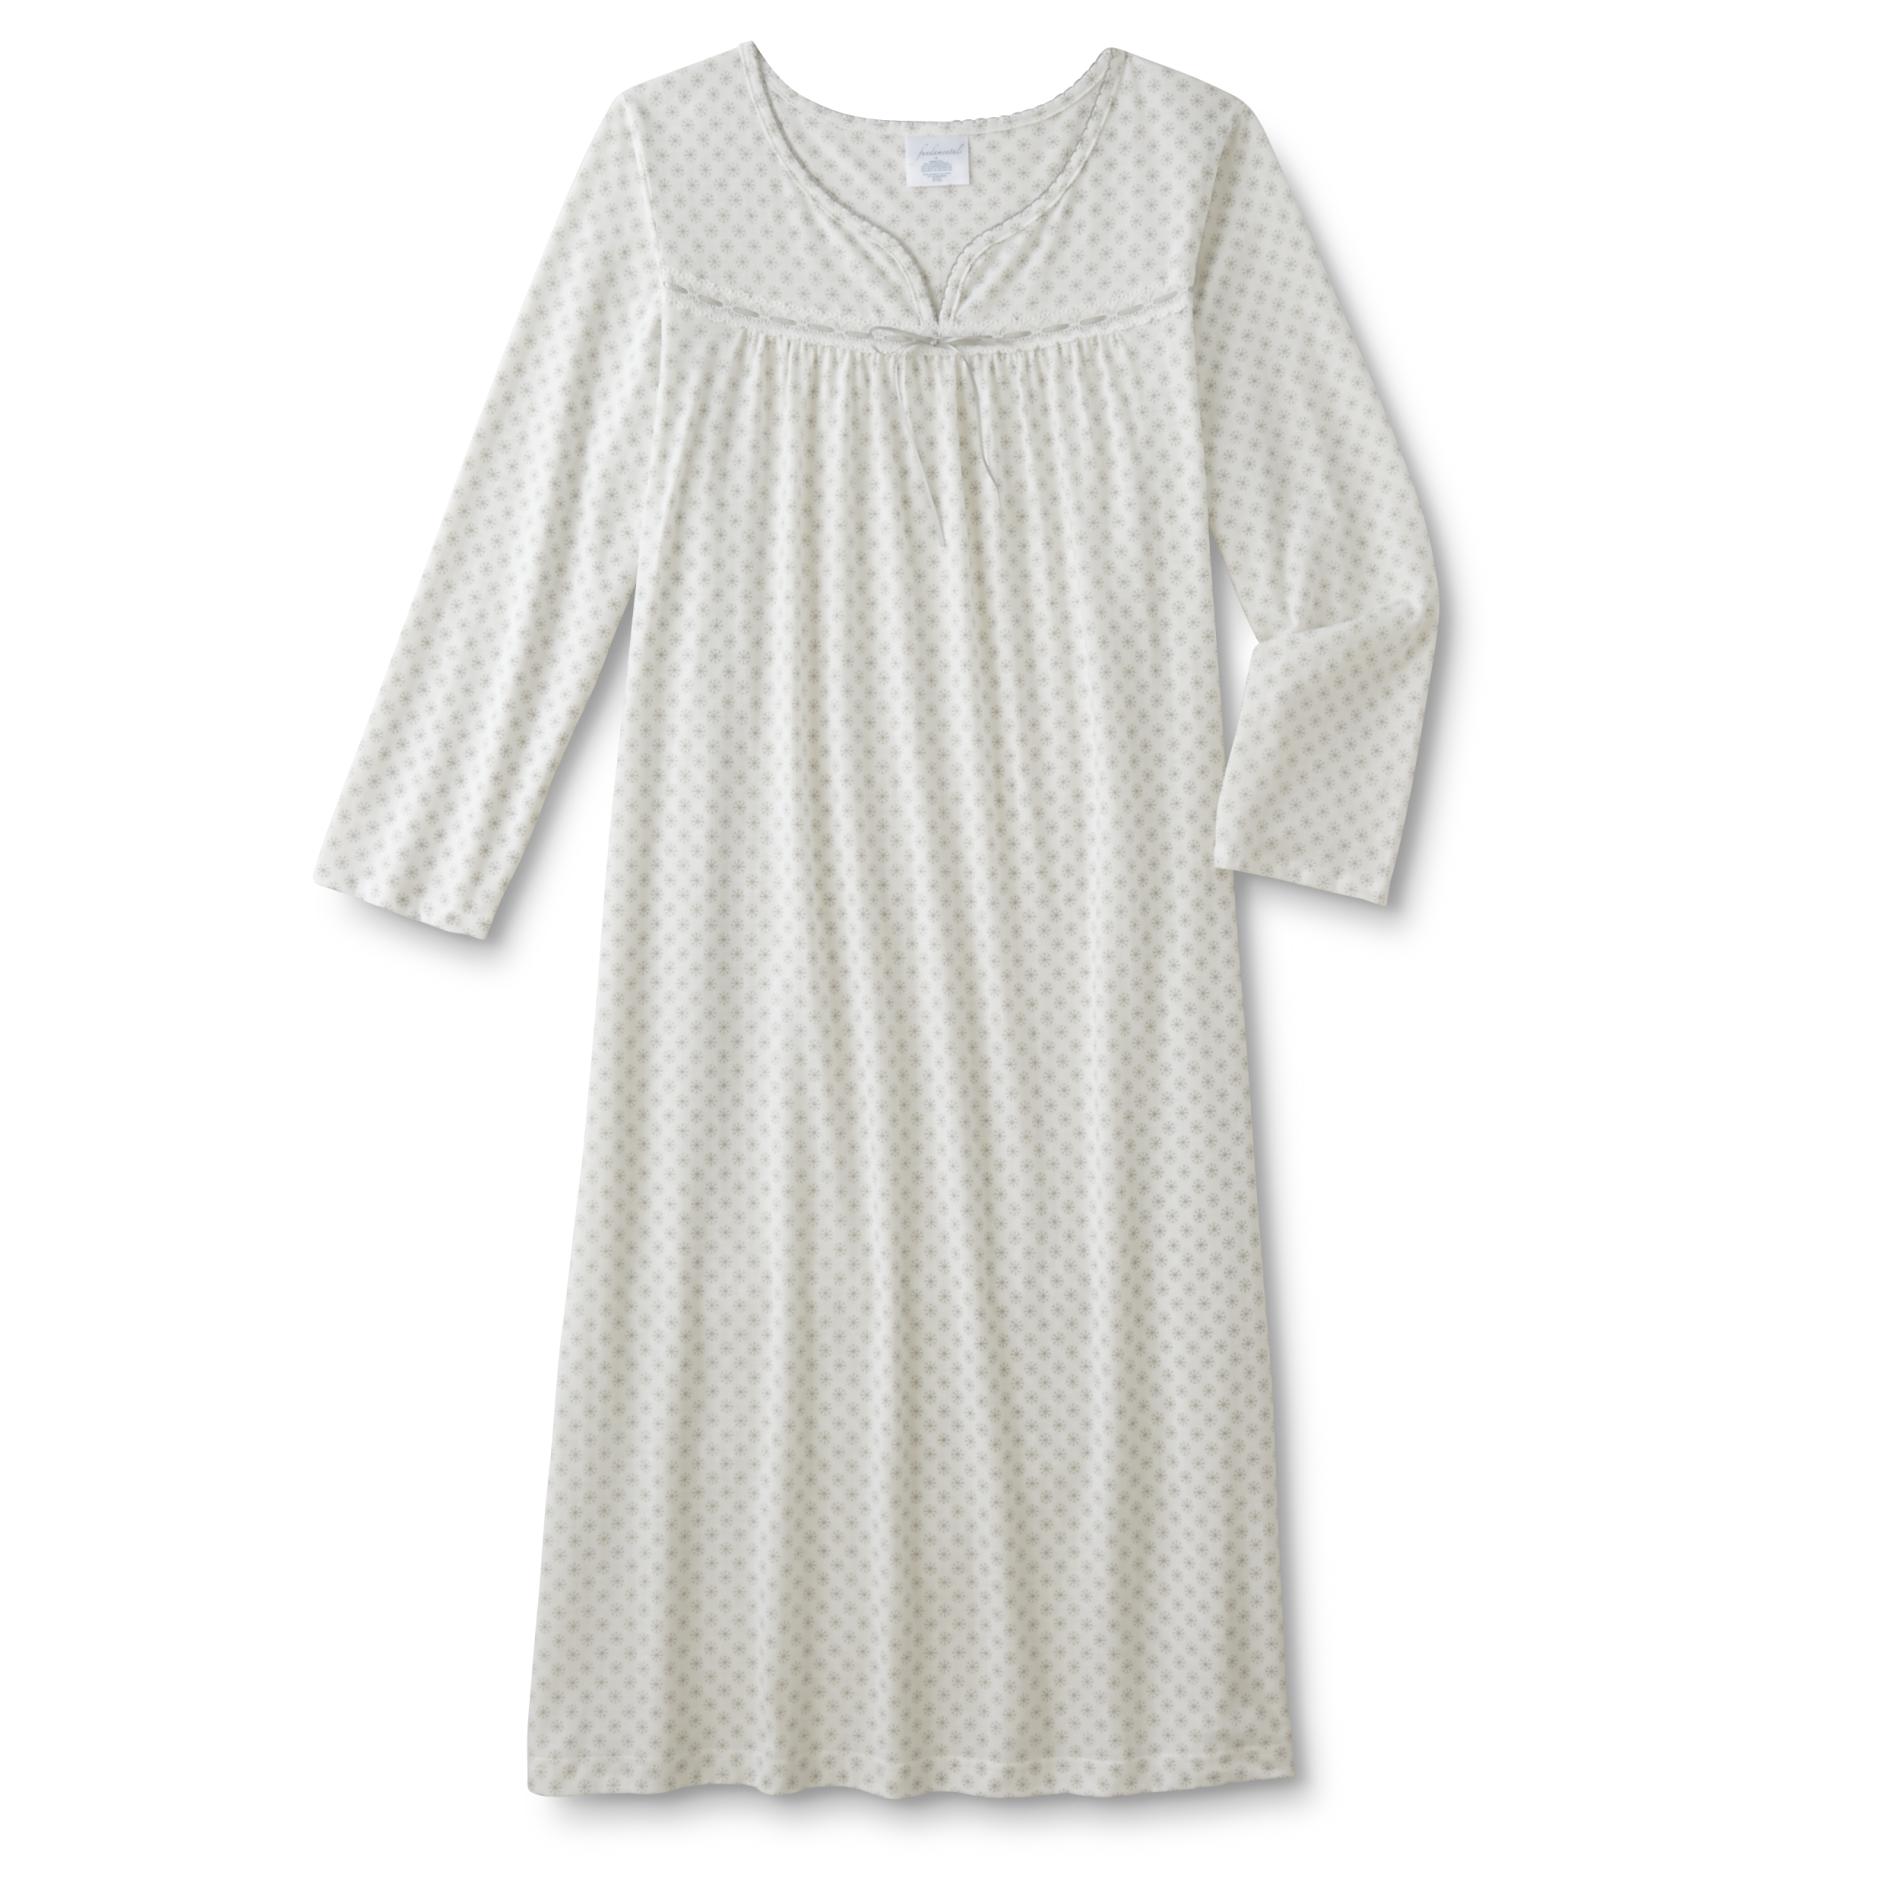 Fundamentals Women's Plus Long-Sleeve Nightgown - Snowflakes